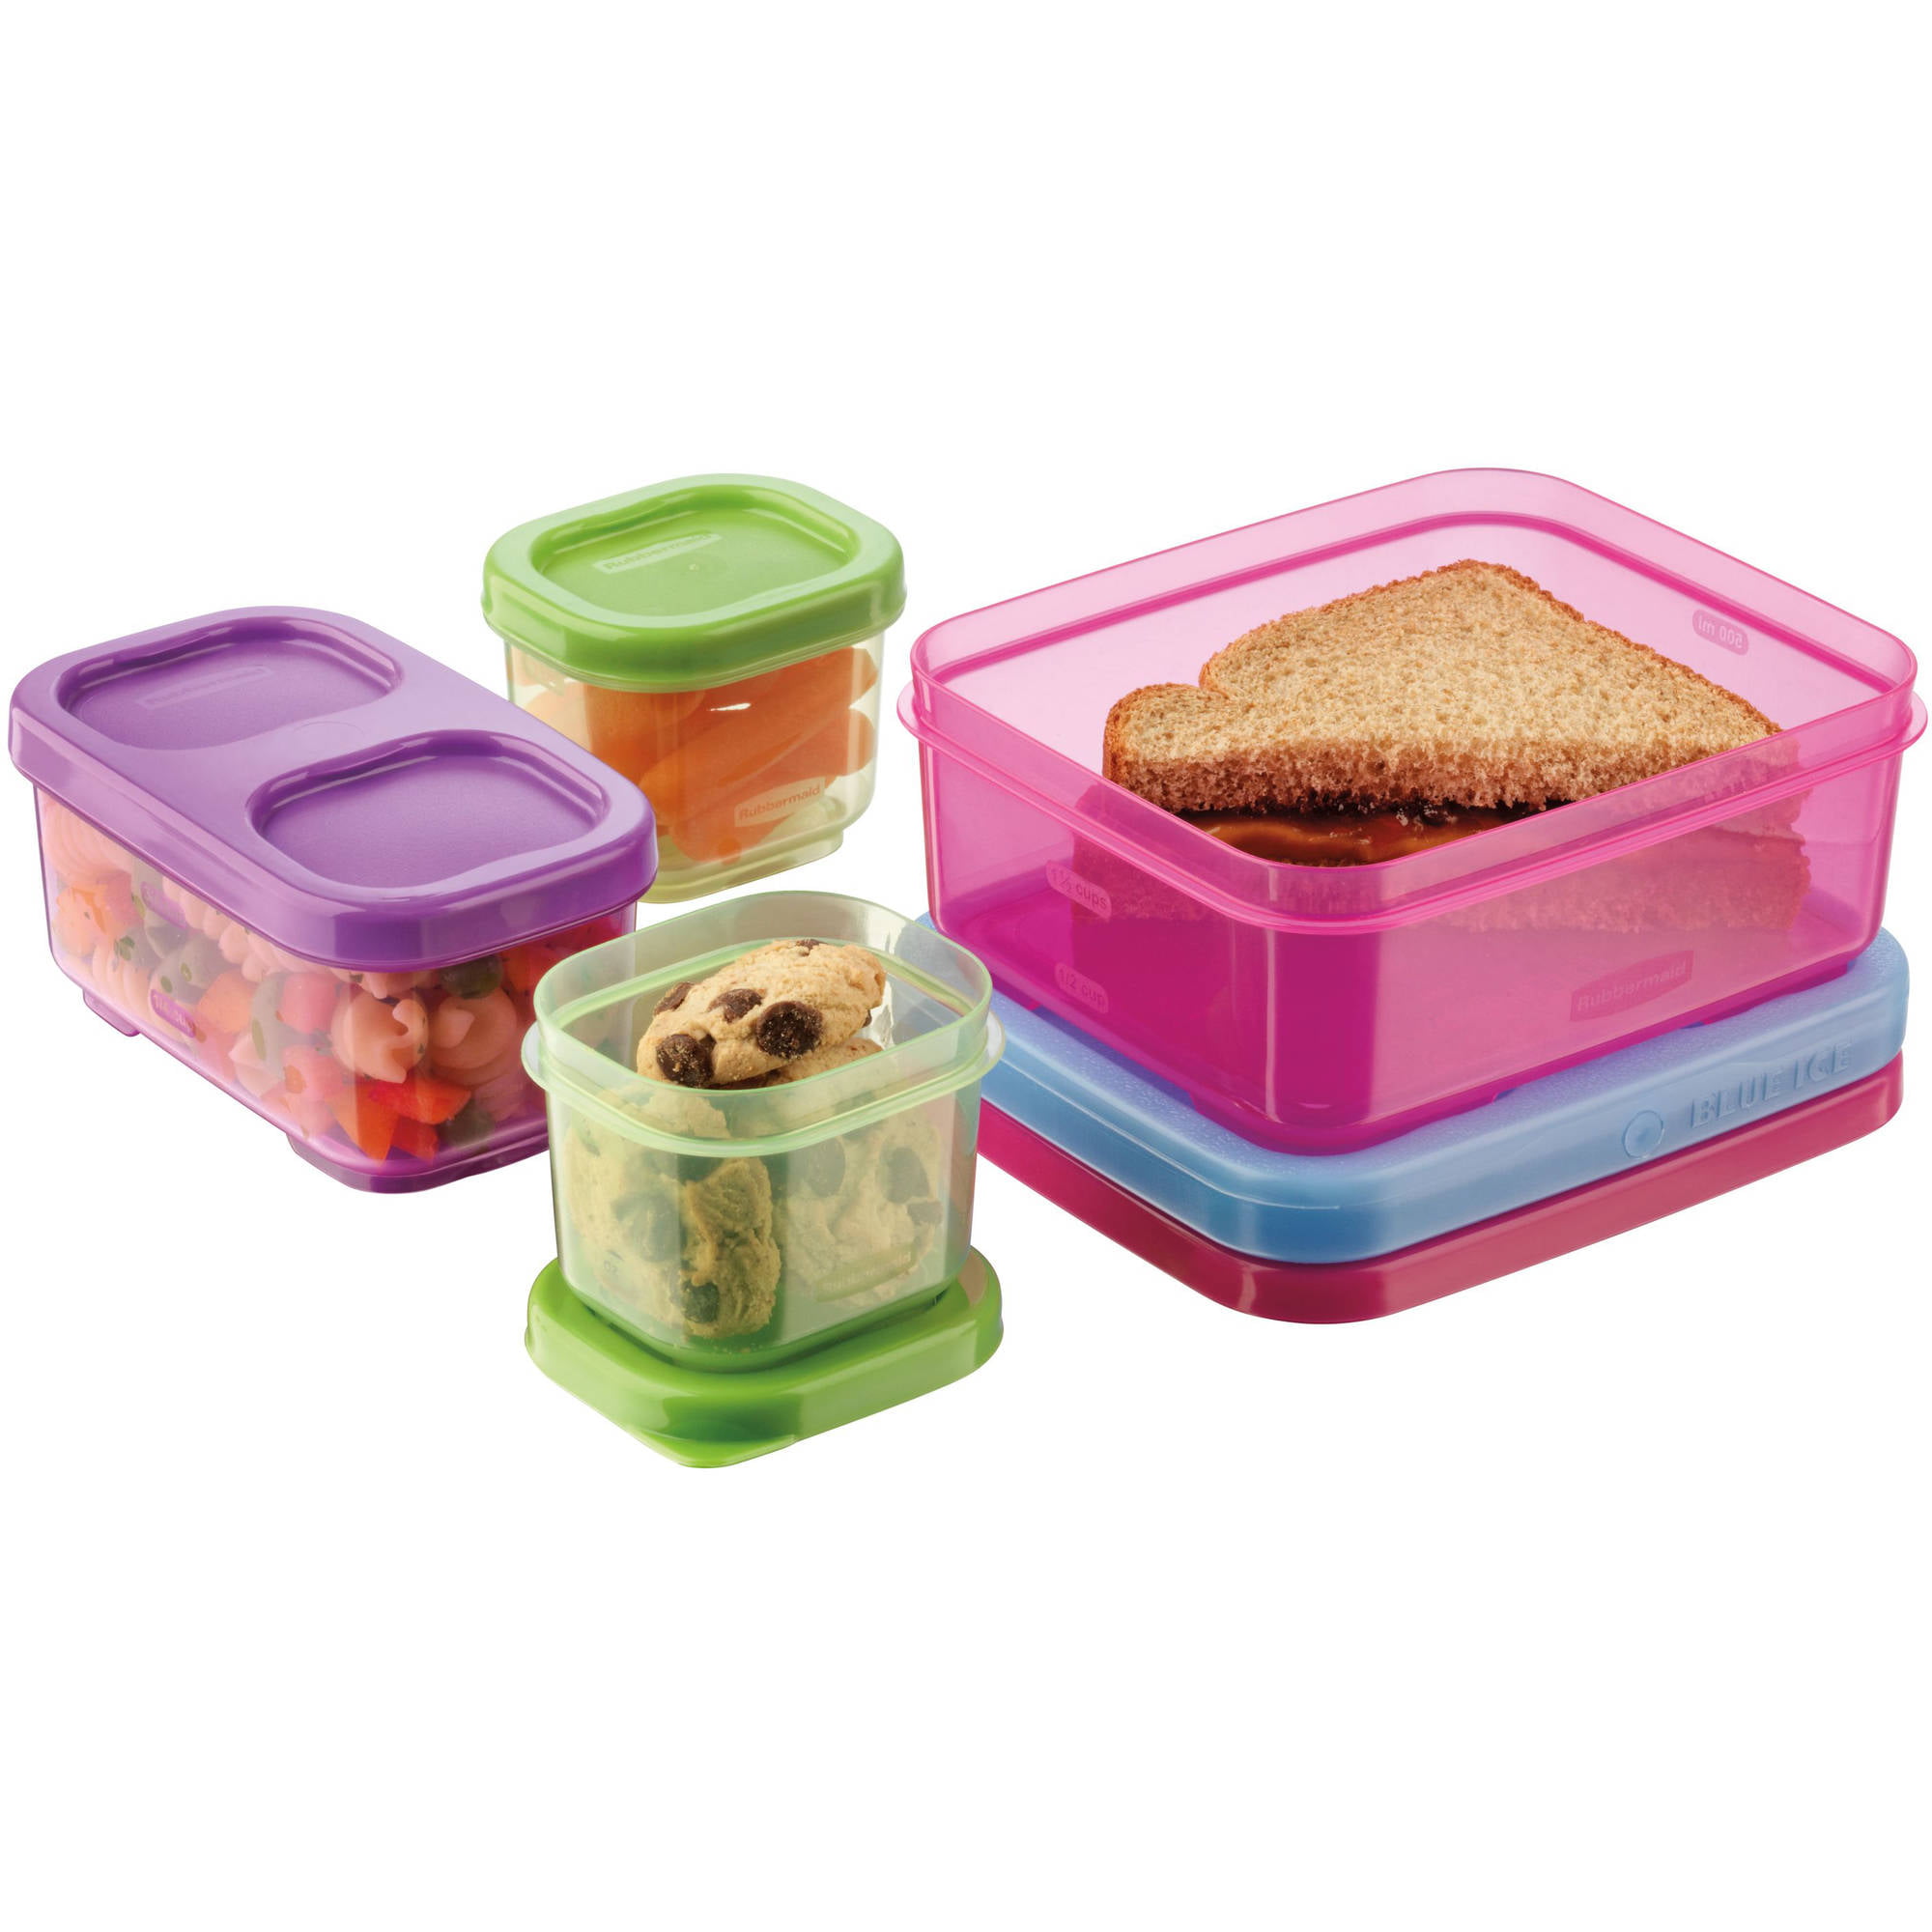 Back At School/Rubbermaid LunchBlox Salad Kit with 20 Lunch Ideas